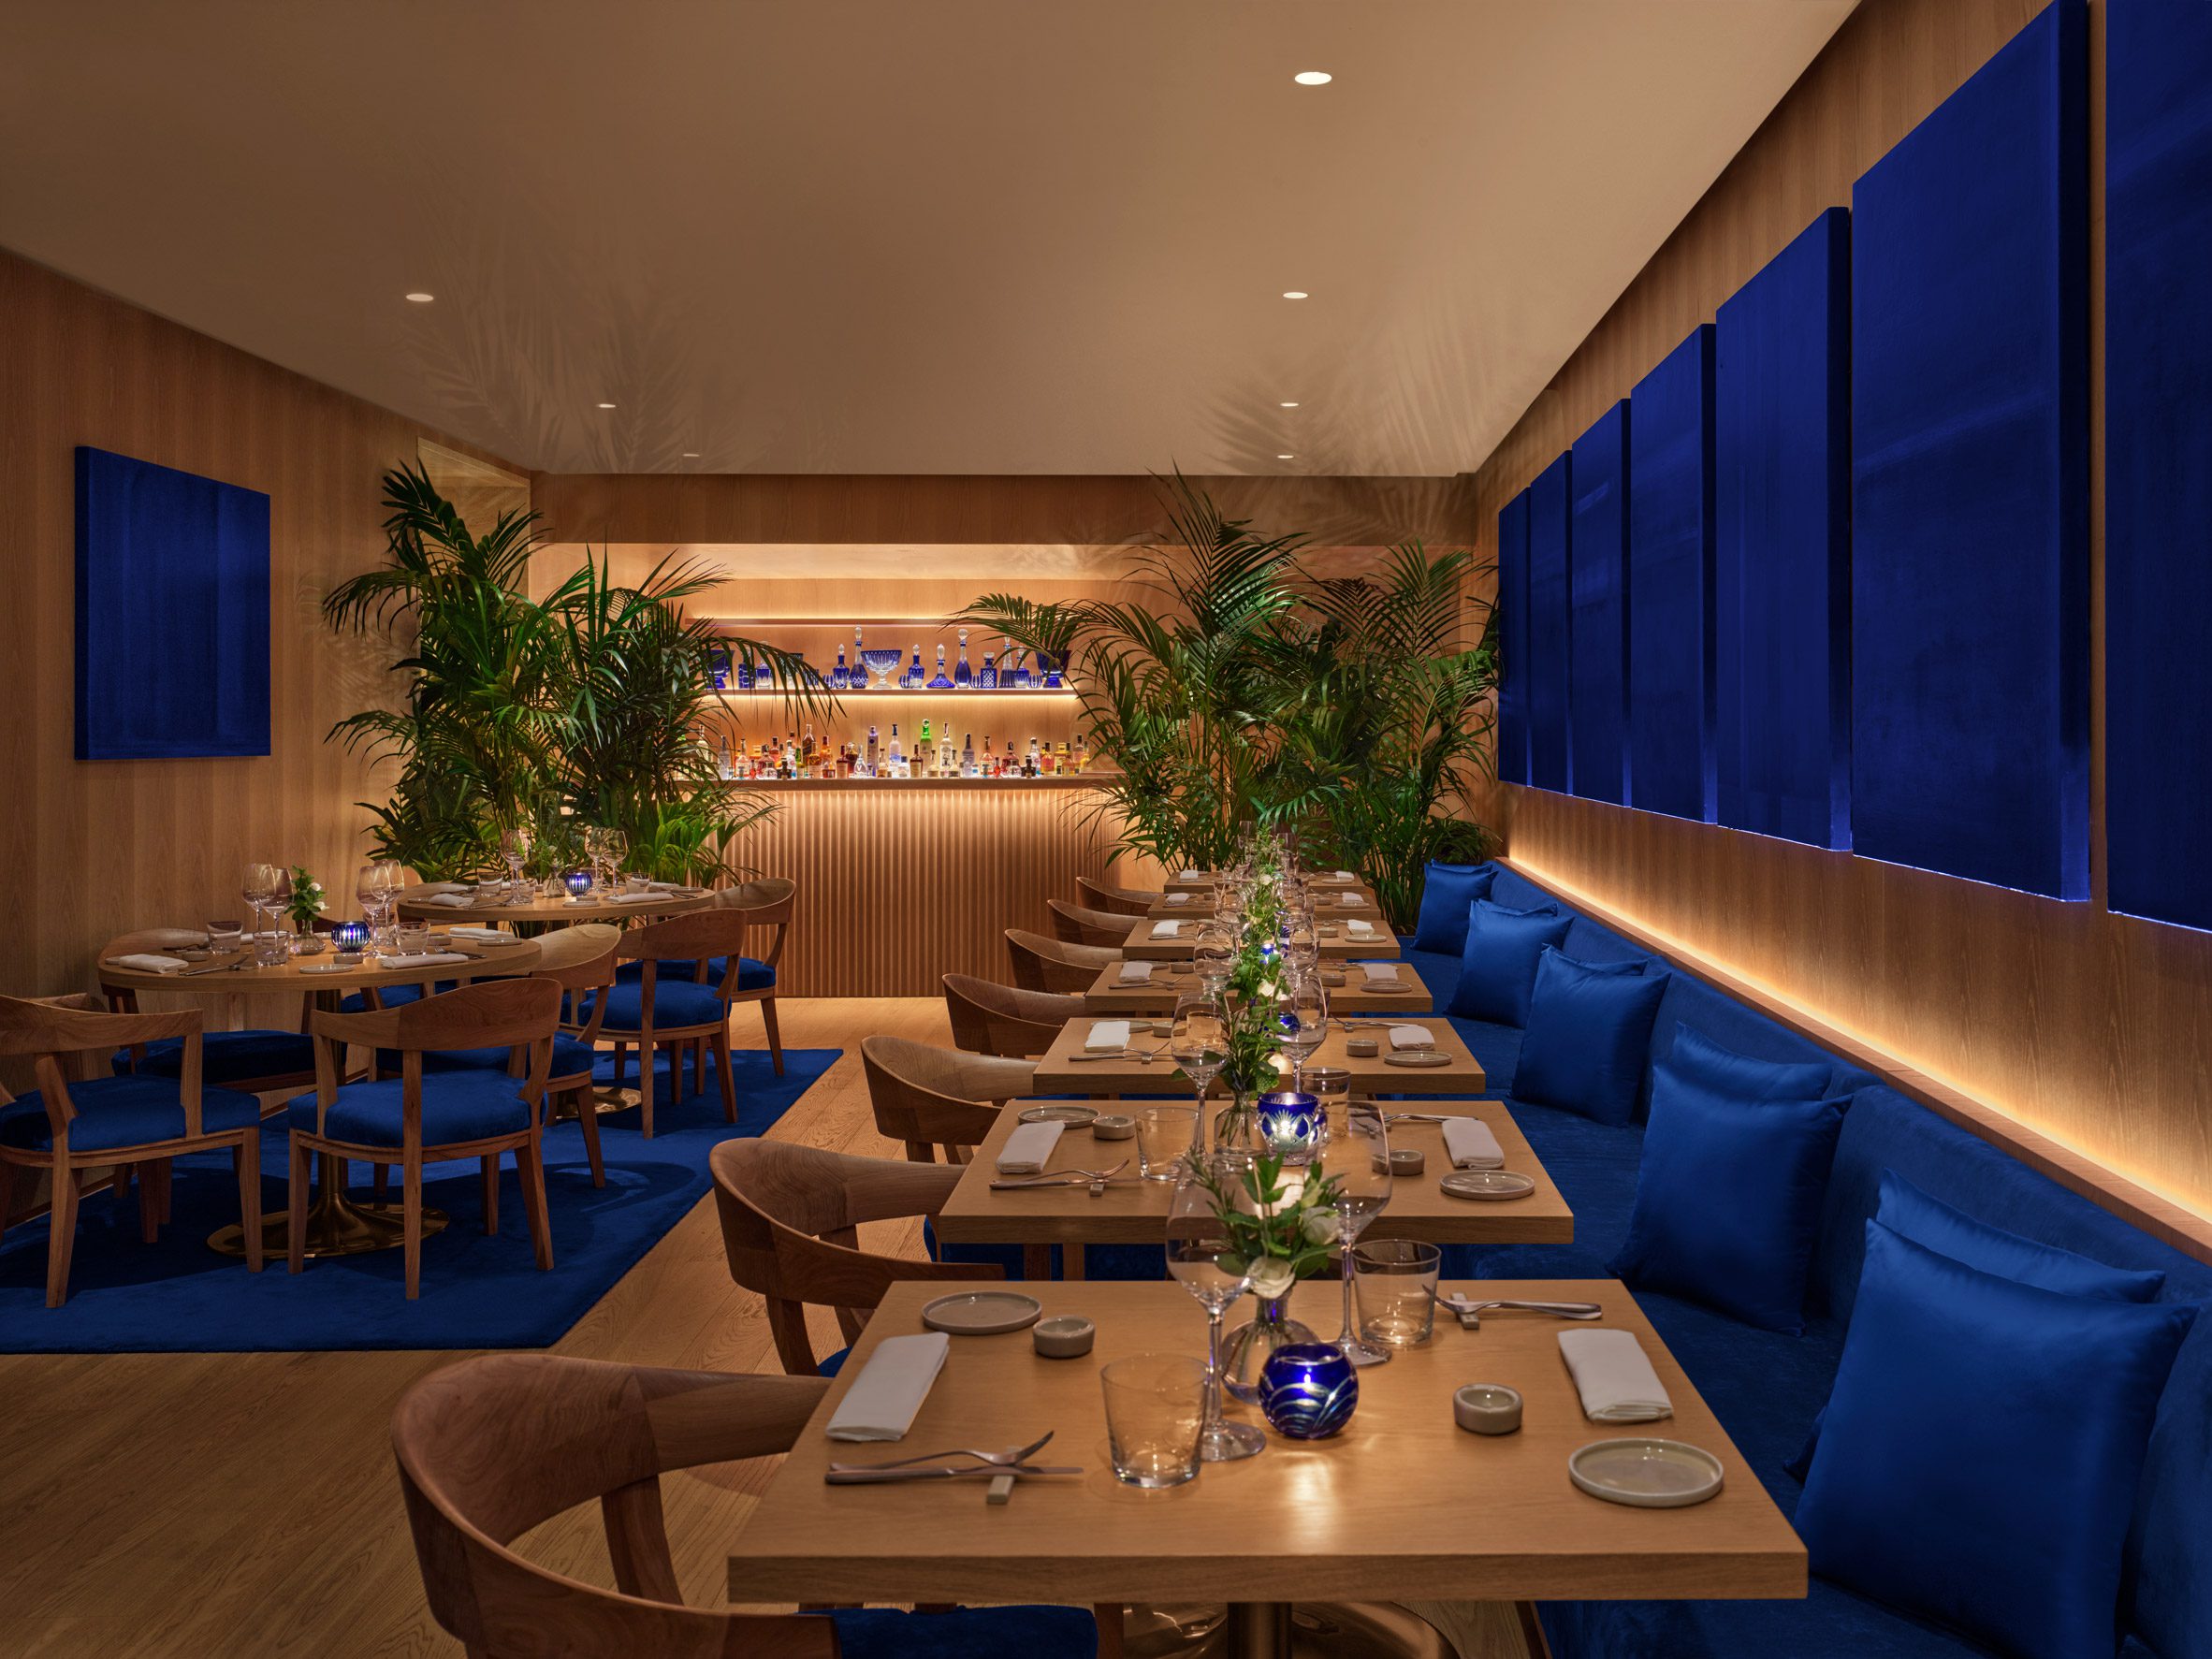 Restaurant with blue artworks and upholstery